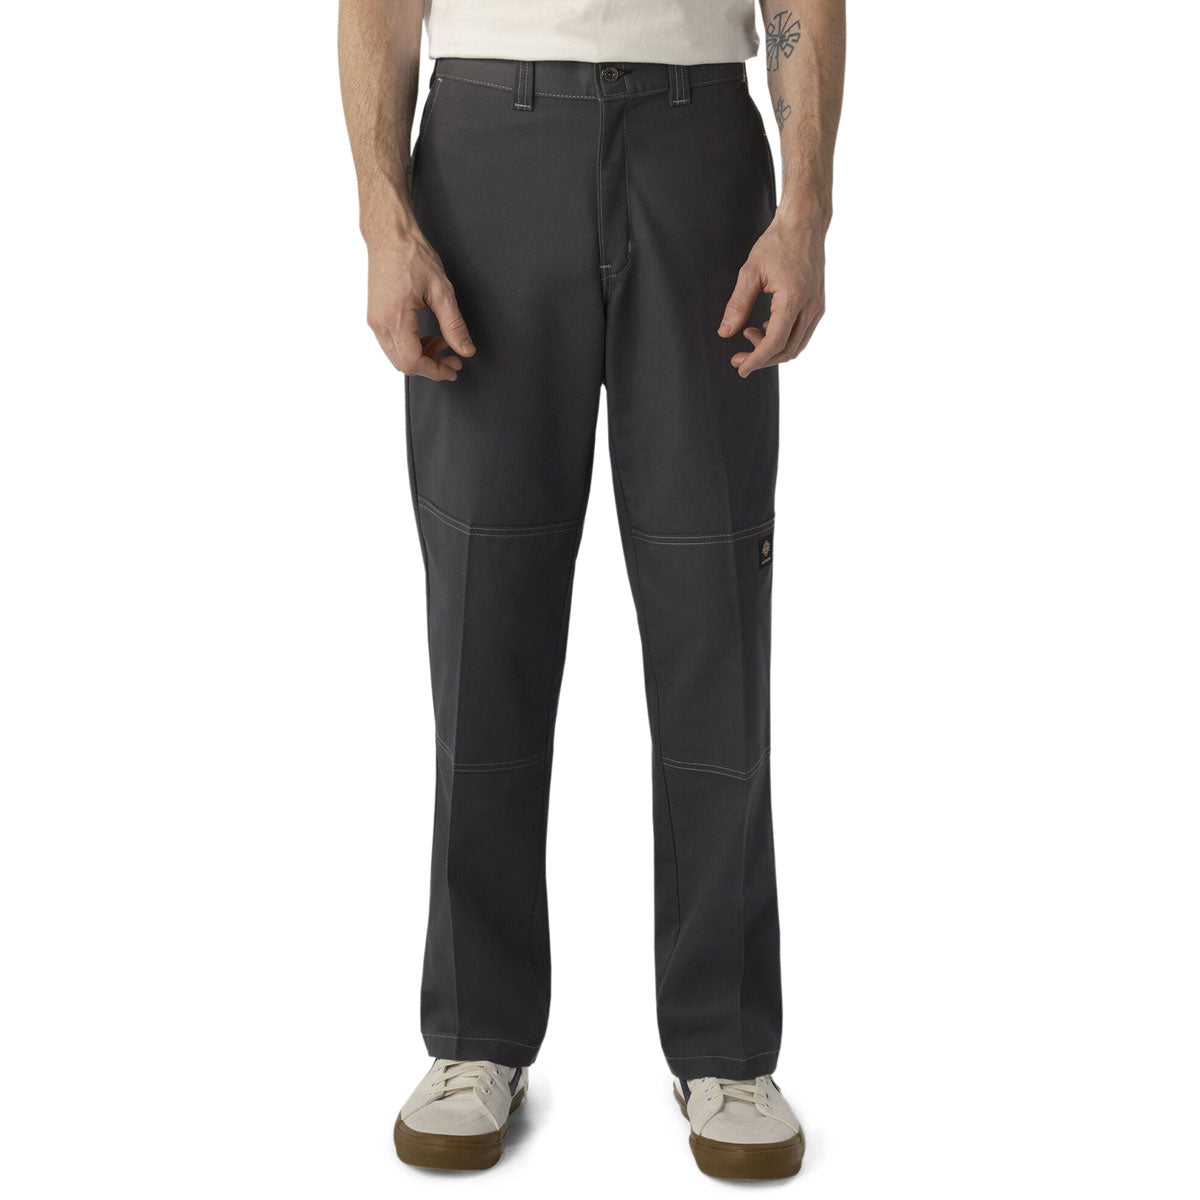 Dickies Regular Fit Double Knee Pants - Charcoal/Grey Stitch image 1